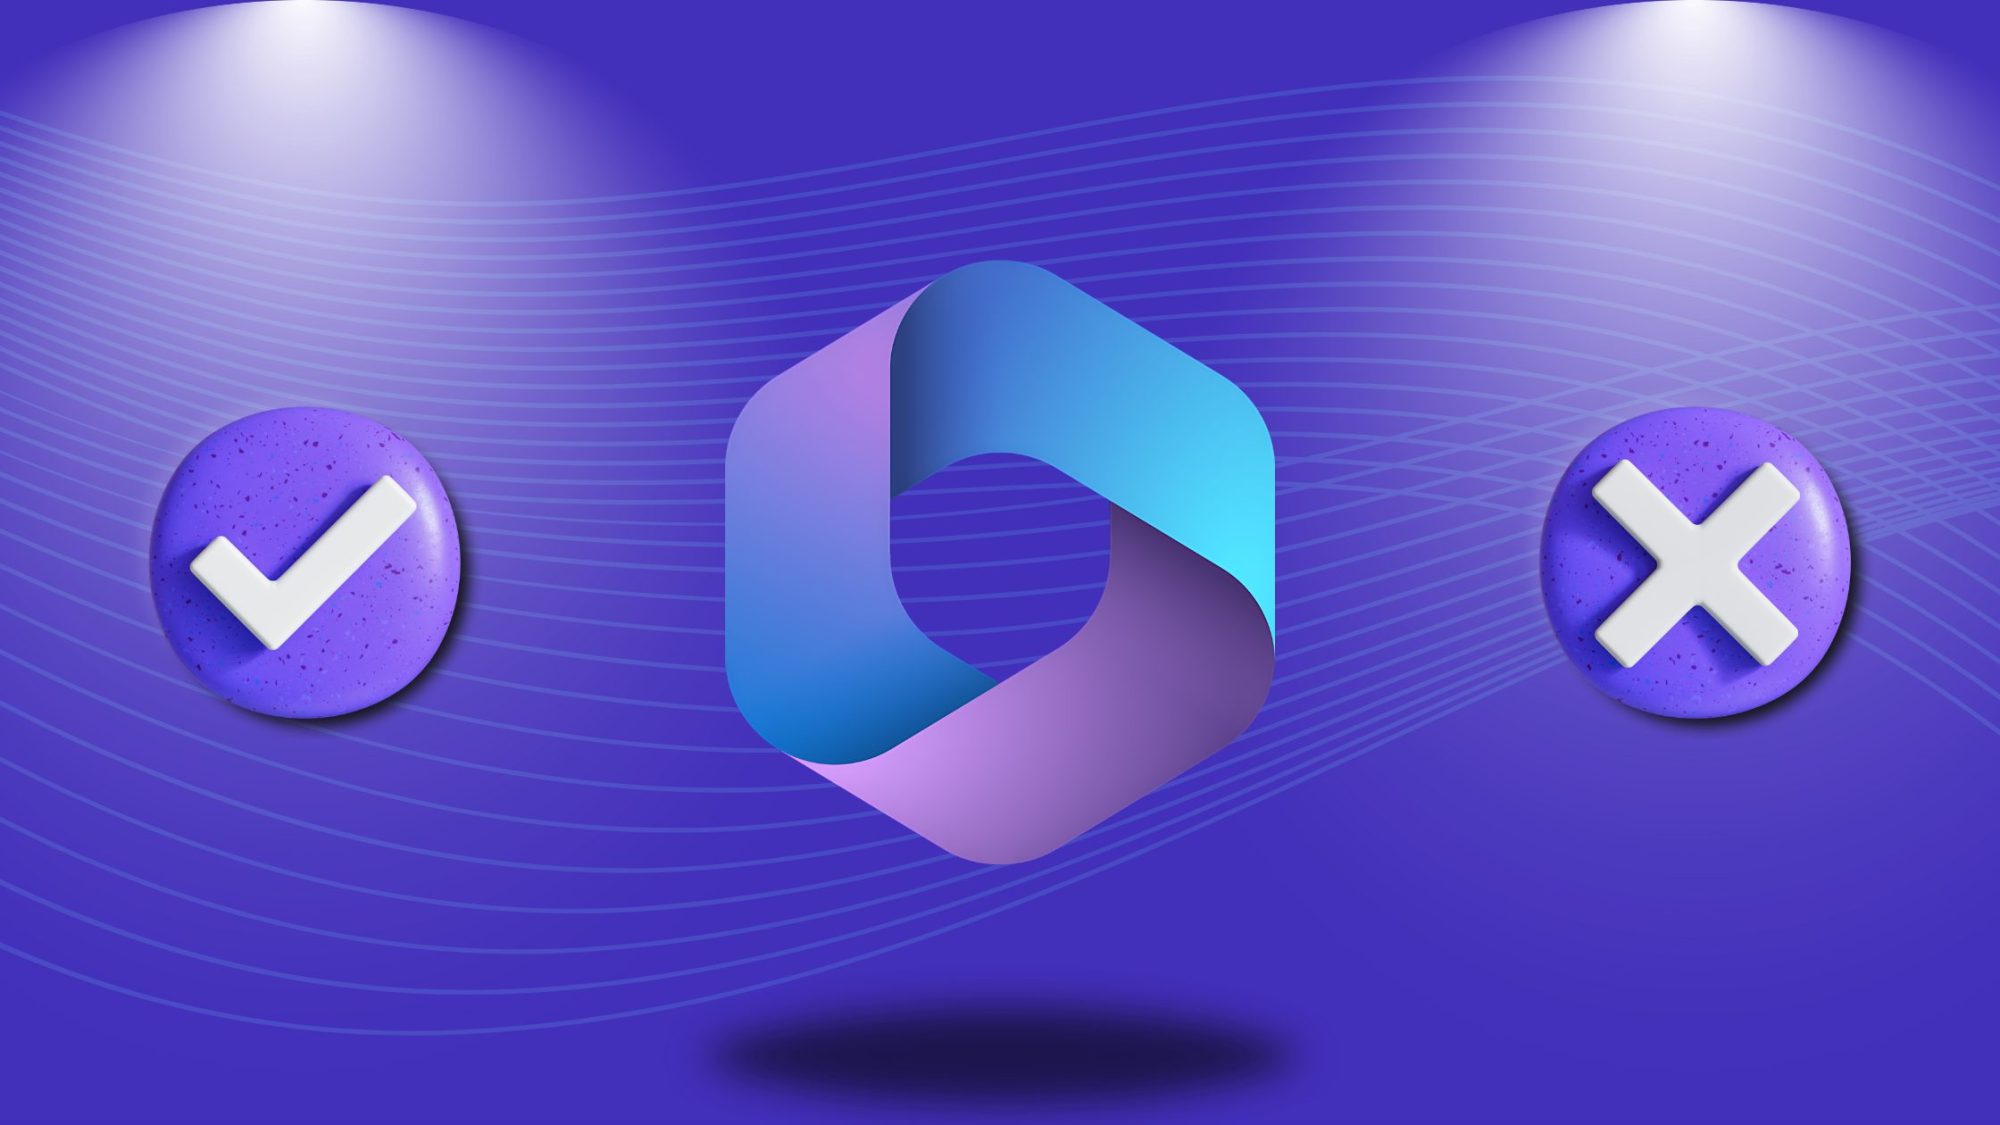 A central hexagonal logo in blue and purple hues is flanked by a purple circle with a white checkmark on the left and a purple circle with a white 'X' on the right.